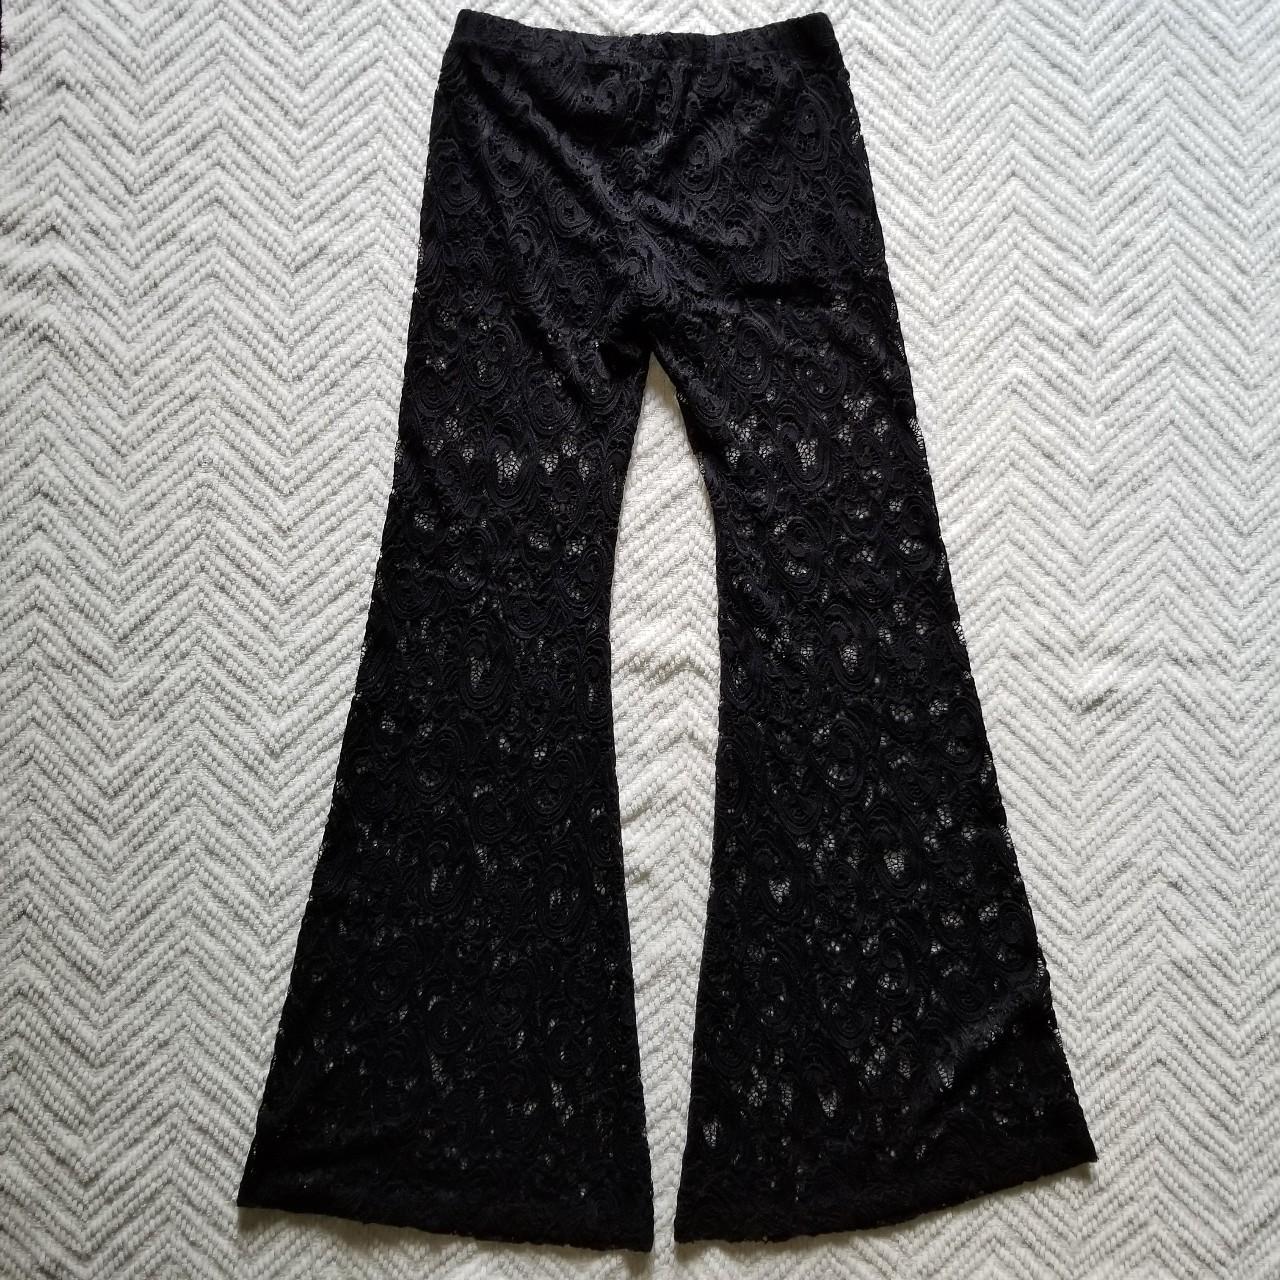 Product Image 2 - See through lace overlay flares